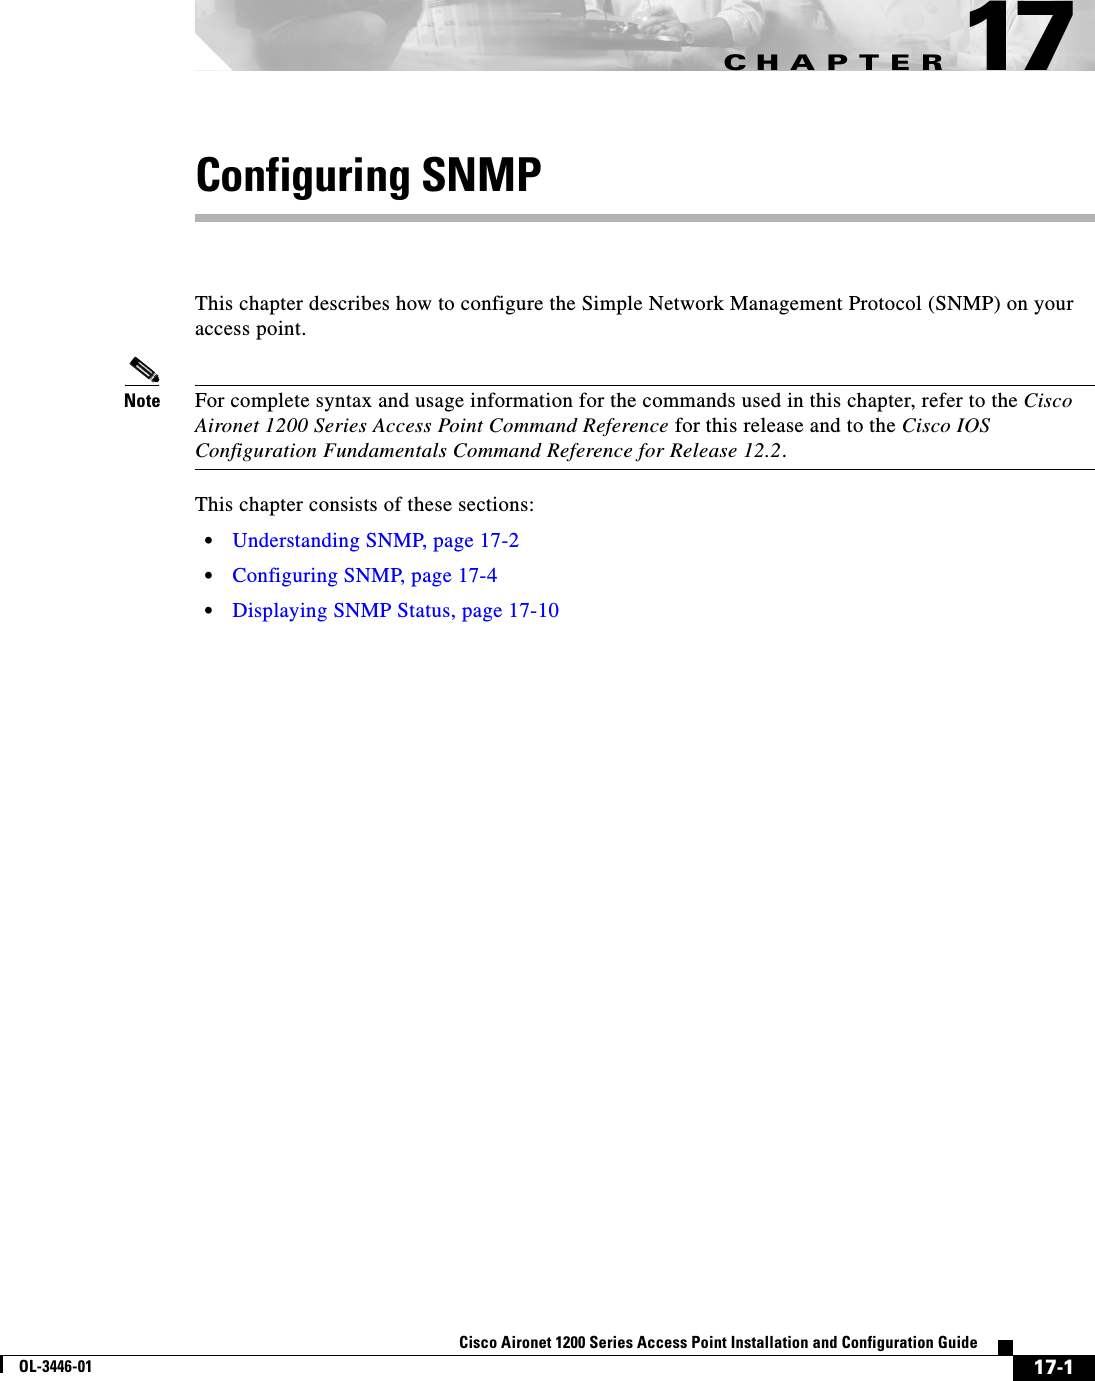 CHAPTER17-1Cisco Aironet 1200 Series Access Point Installation and Configuration GuideOL-3446-0117Configuring SNMPThis chapter describes how to configure the Simple Network Management Protocol (SNMP) on your access point.Note For complete syntax and usage information for the commands used in this chapter, refer to the Cisco Aironet 1200 Series Access Point Command Reference for this release and to the Cisco IOS Configuration Fundamentals Command Reference for Release 12.2.This chapter consists of these sections:•Understanding SNMP, page 17-2•Configuring SNMP, page 17-4•Displaying SNMP Status, page 17-10